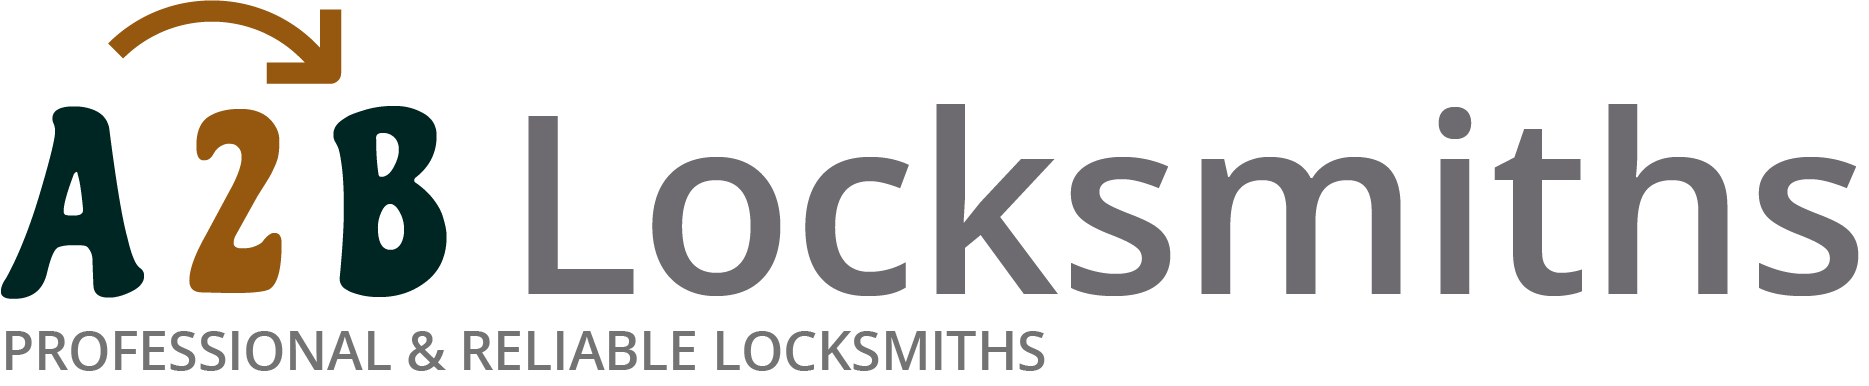 If you are locked out of house in Isleworth, our 24/7 local emergency locksmith services can help you.